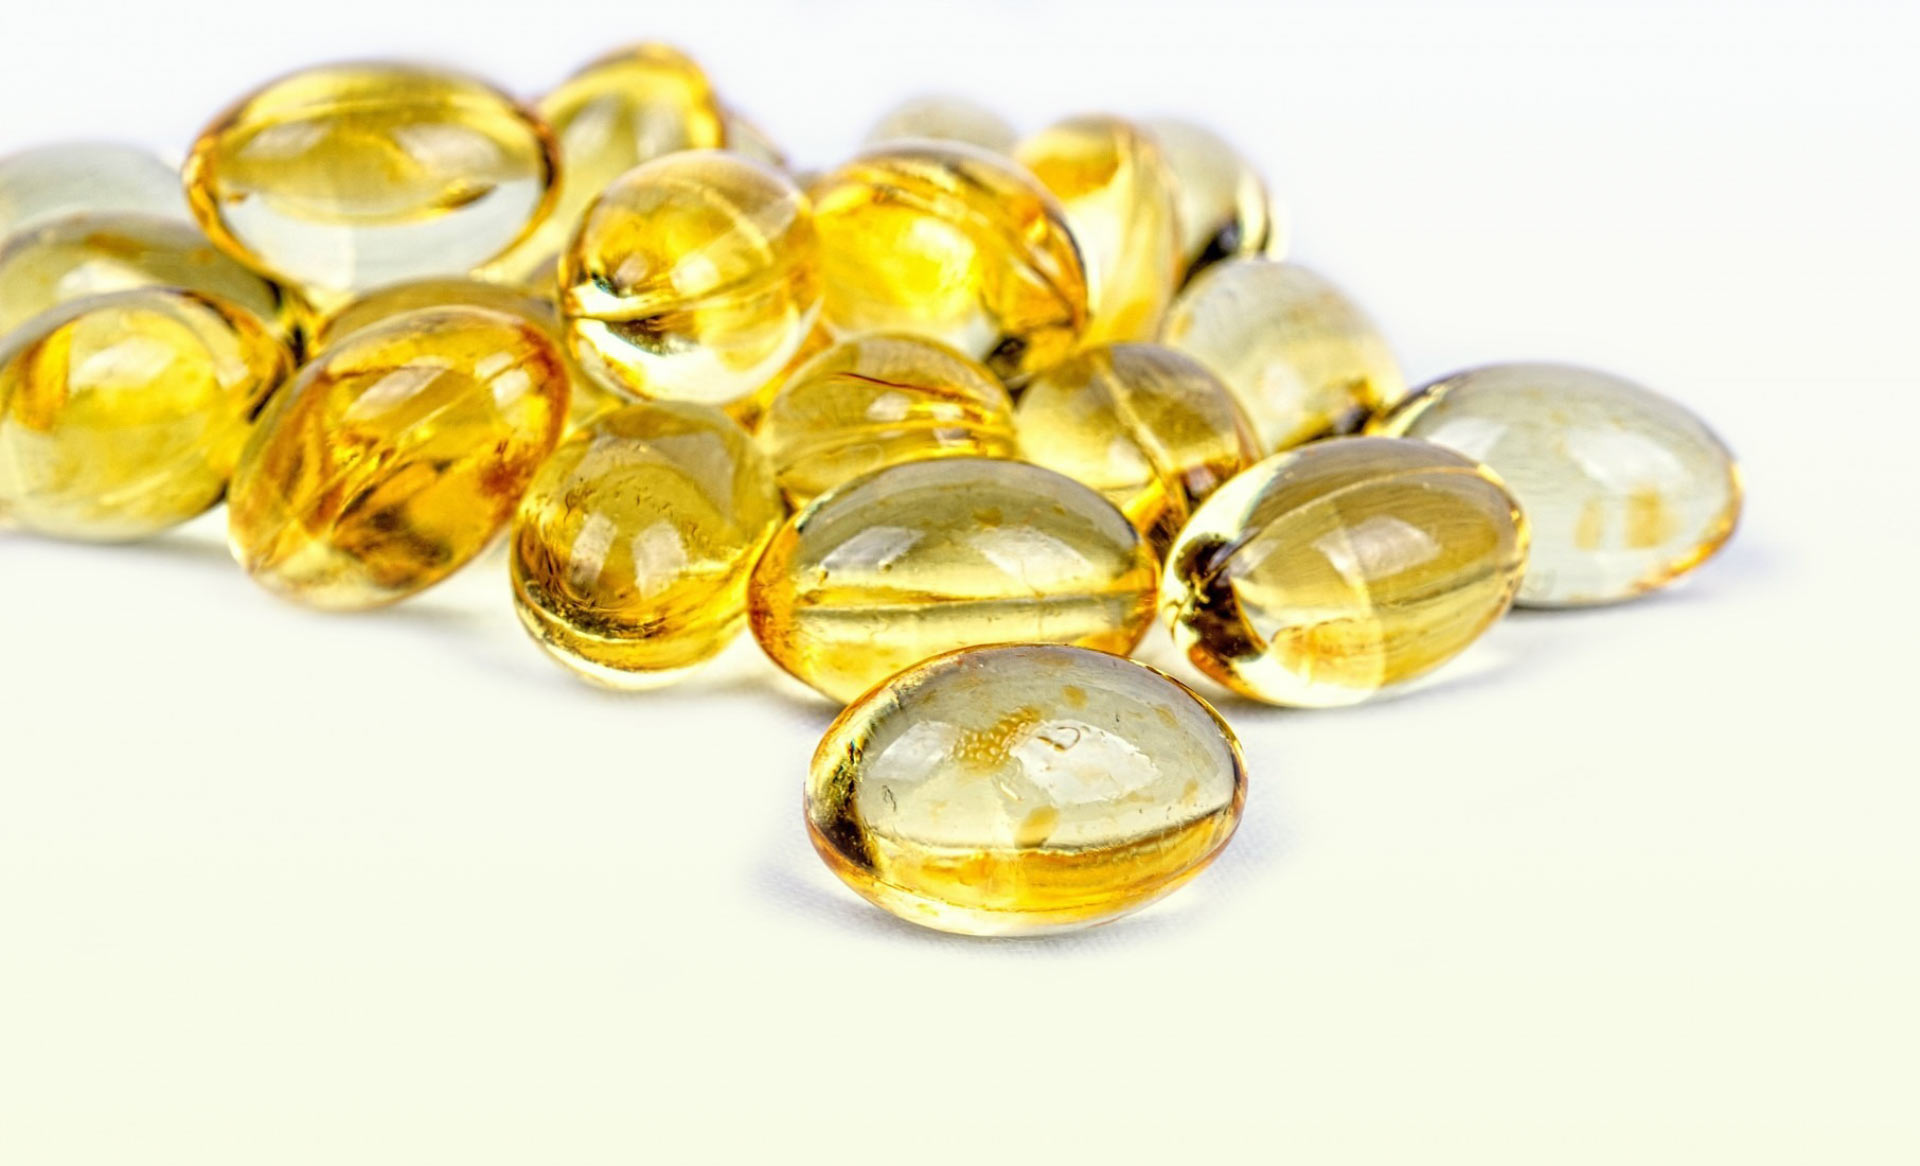 Could monthly vitamin D supplements help prevent heart attacks?